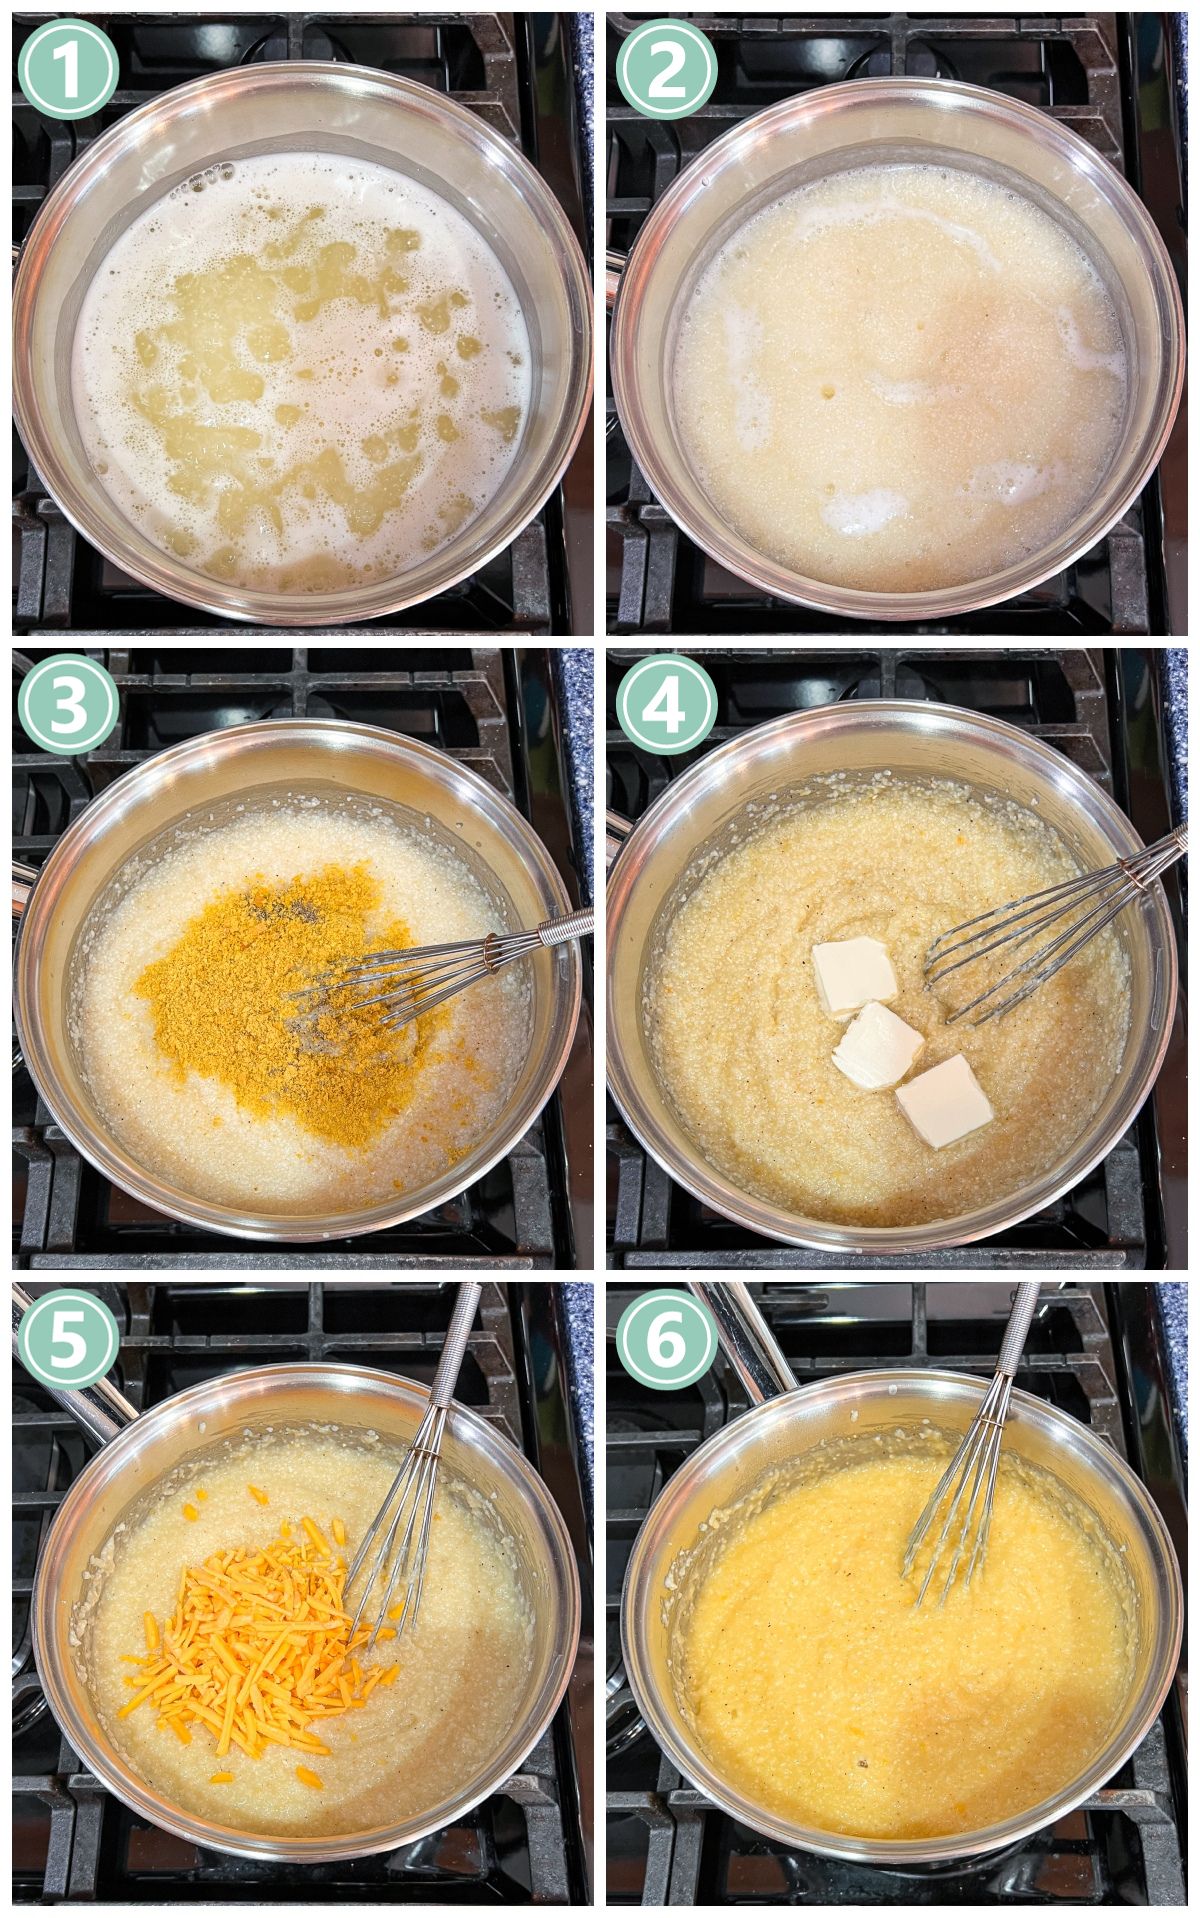 A series of photos showing the process of making dairy free cheesy grits.